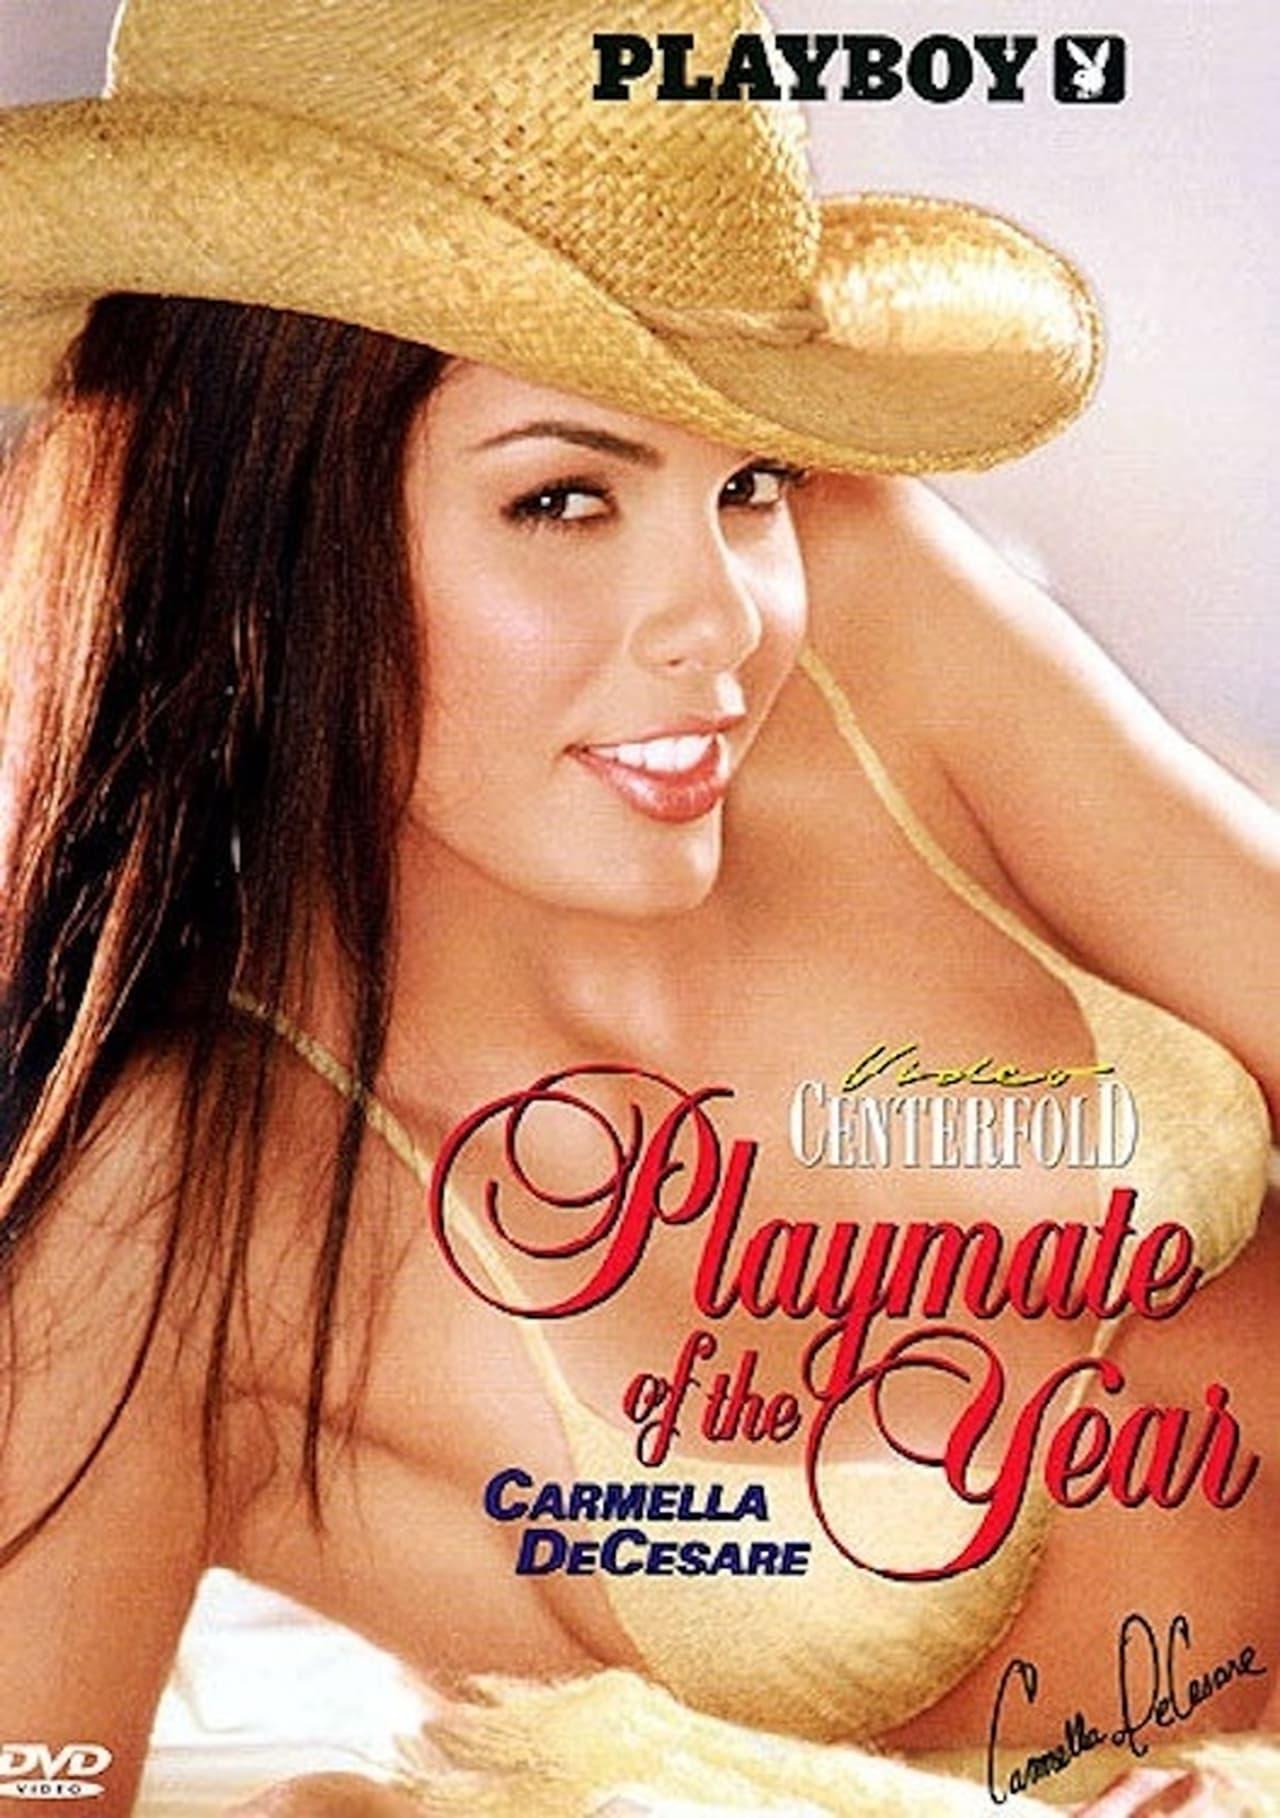 Playboy Video Centerfold: Carmella DeCesare - Playmate of the Year 2004 poster